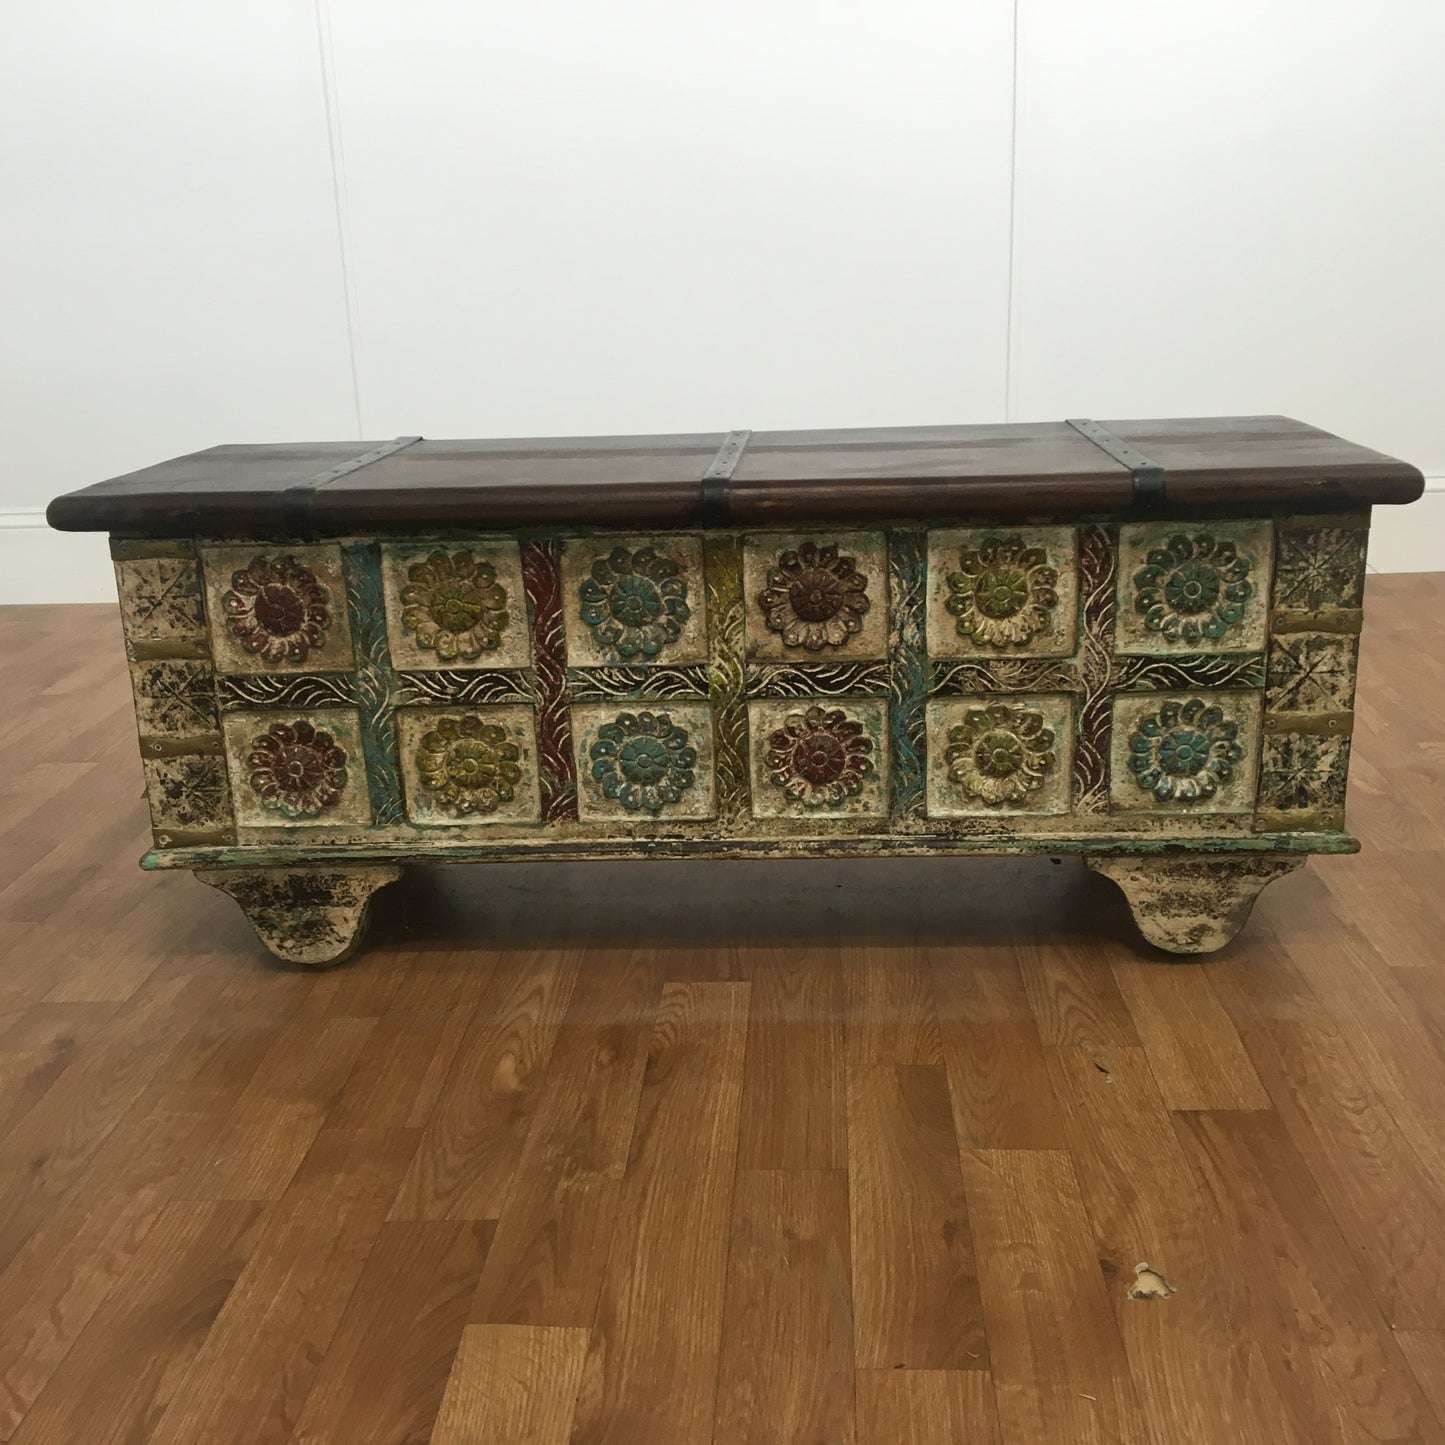 PERSIAN COFFEE TABLE WITH STORAGE